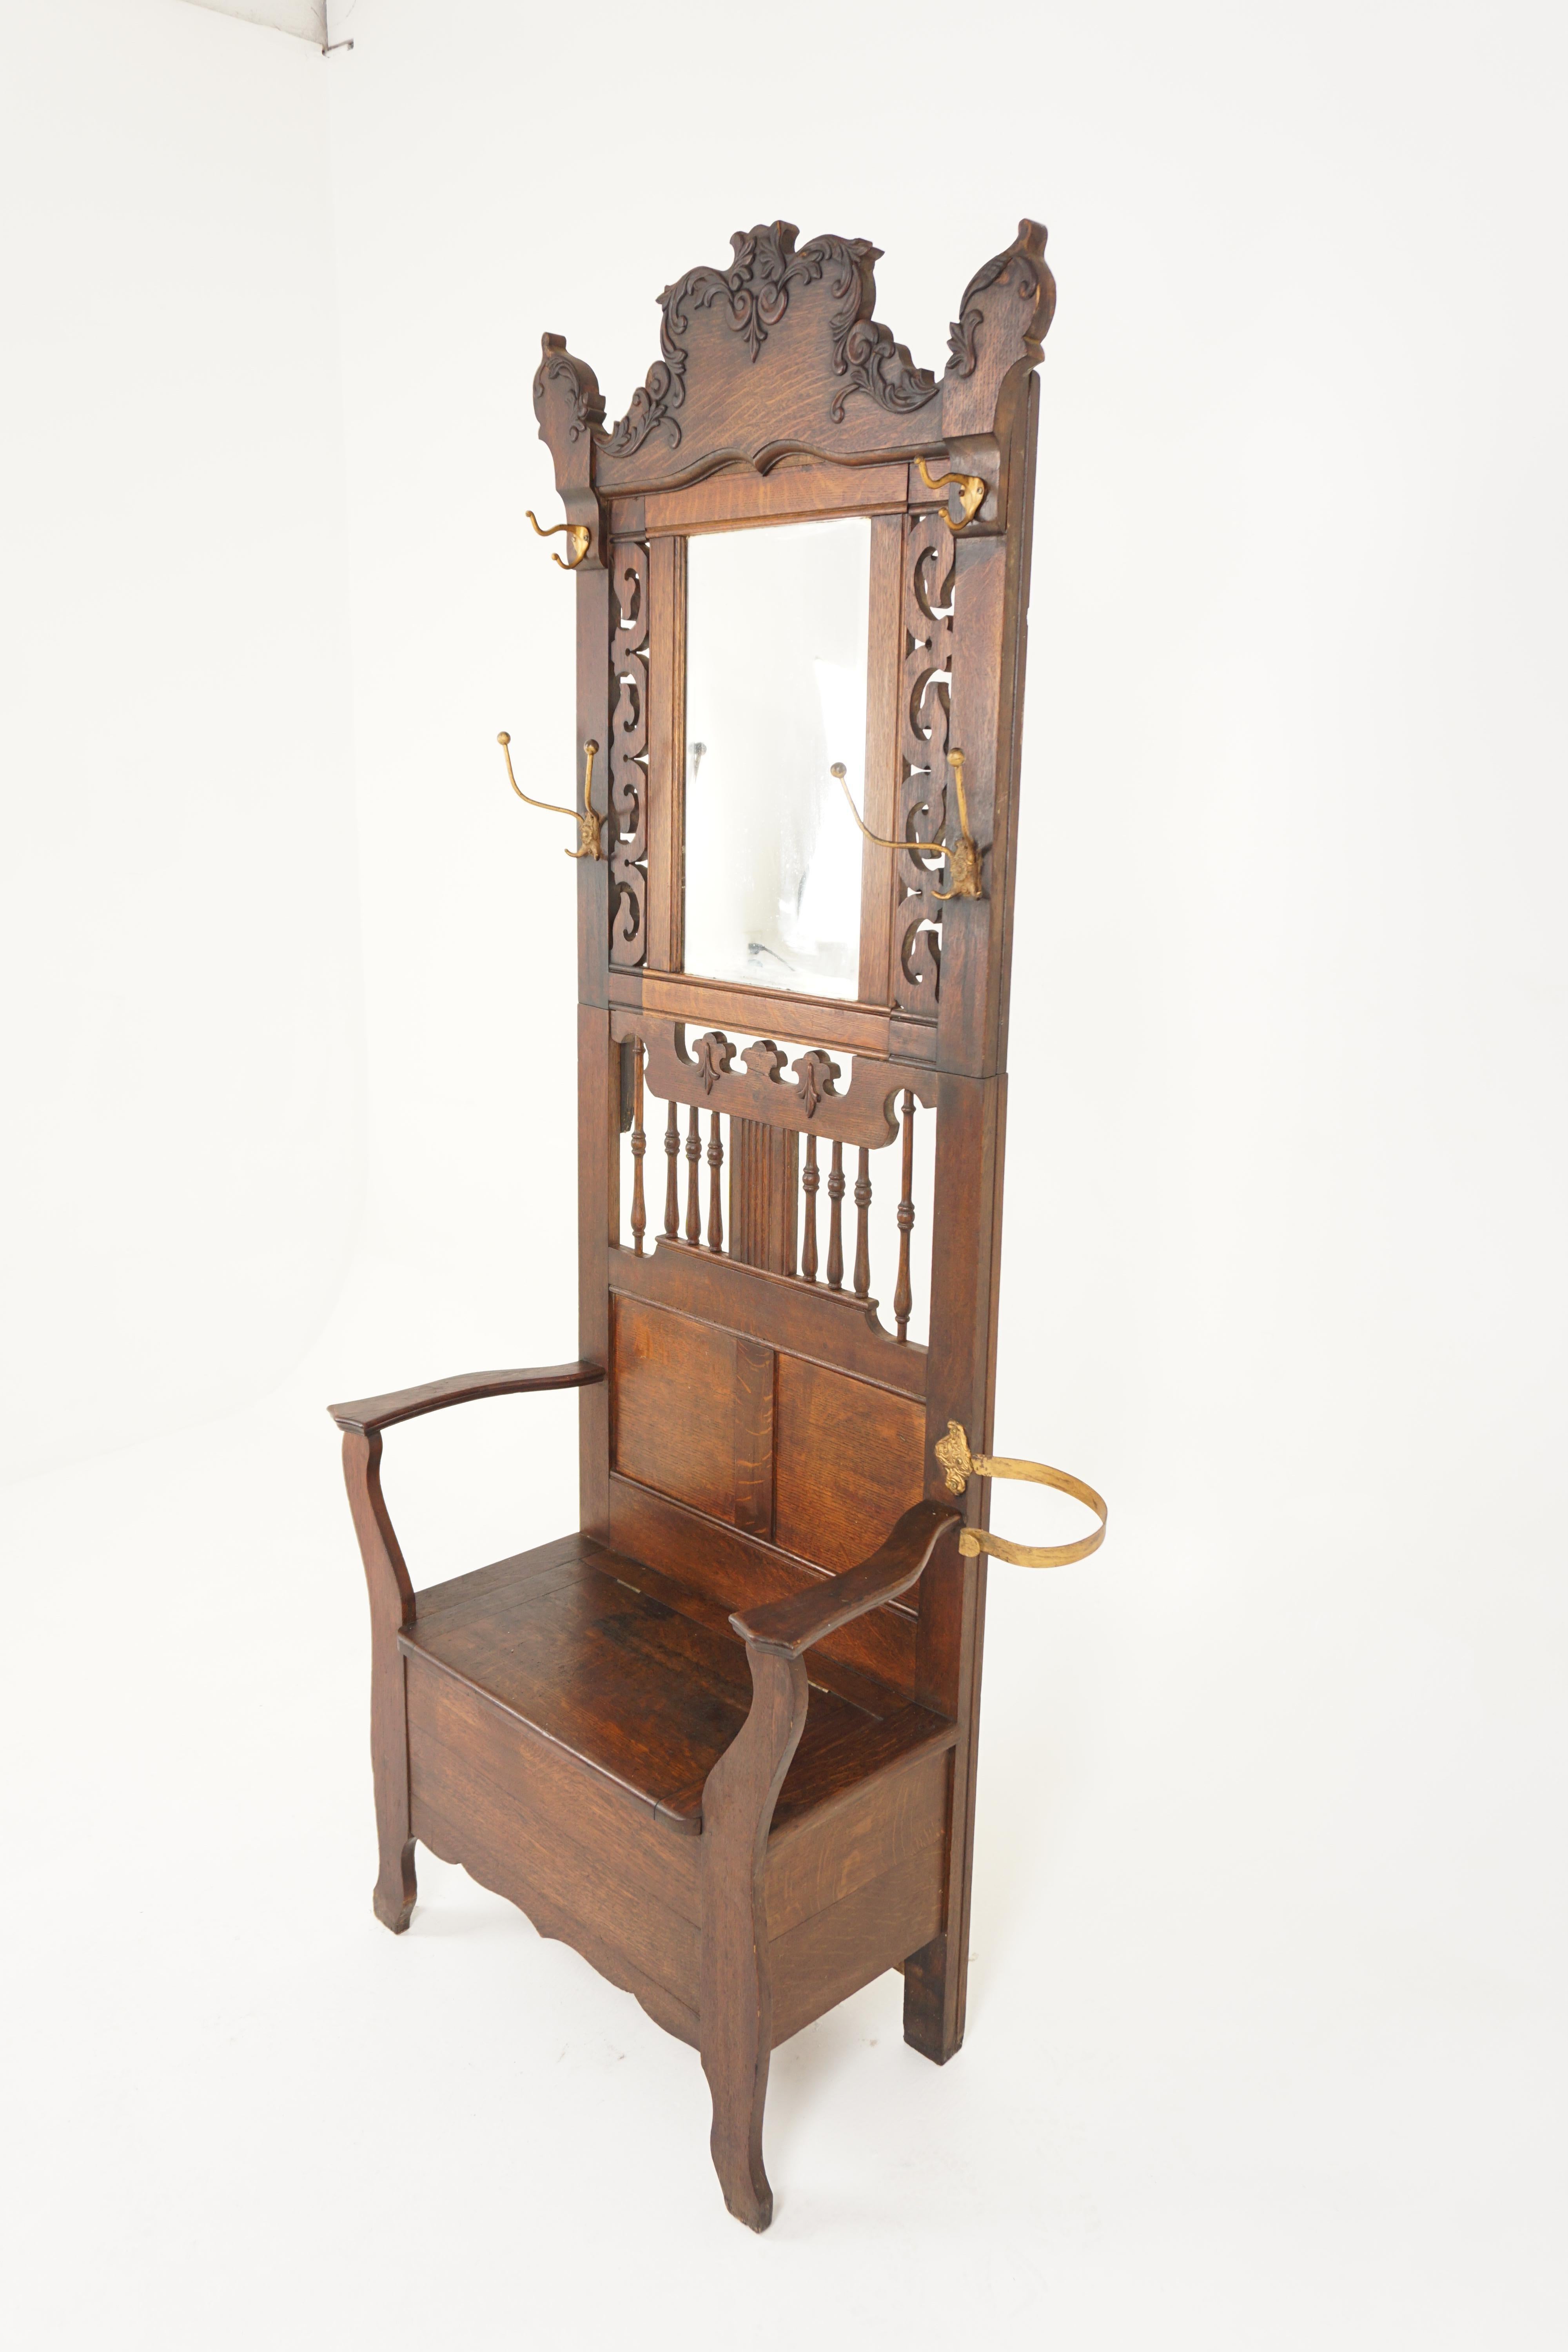 American Antique Oak hall stand, Hall Tree, storage bench, American 1900, H698

American 1900
Solid Oak
Original Finish
Carved pediment to the top
Rectangular bevelled mirror with foxing
Flanked by carved open fretwork
4 original metal